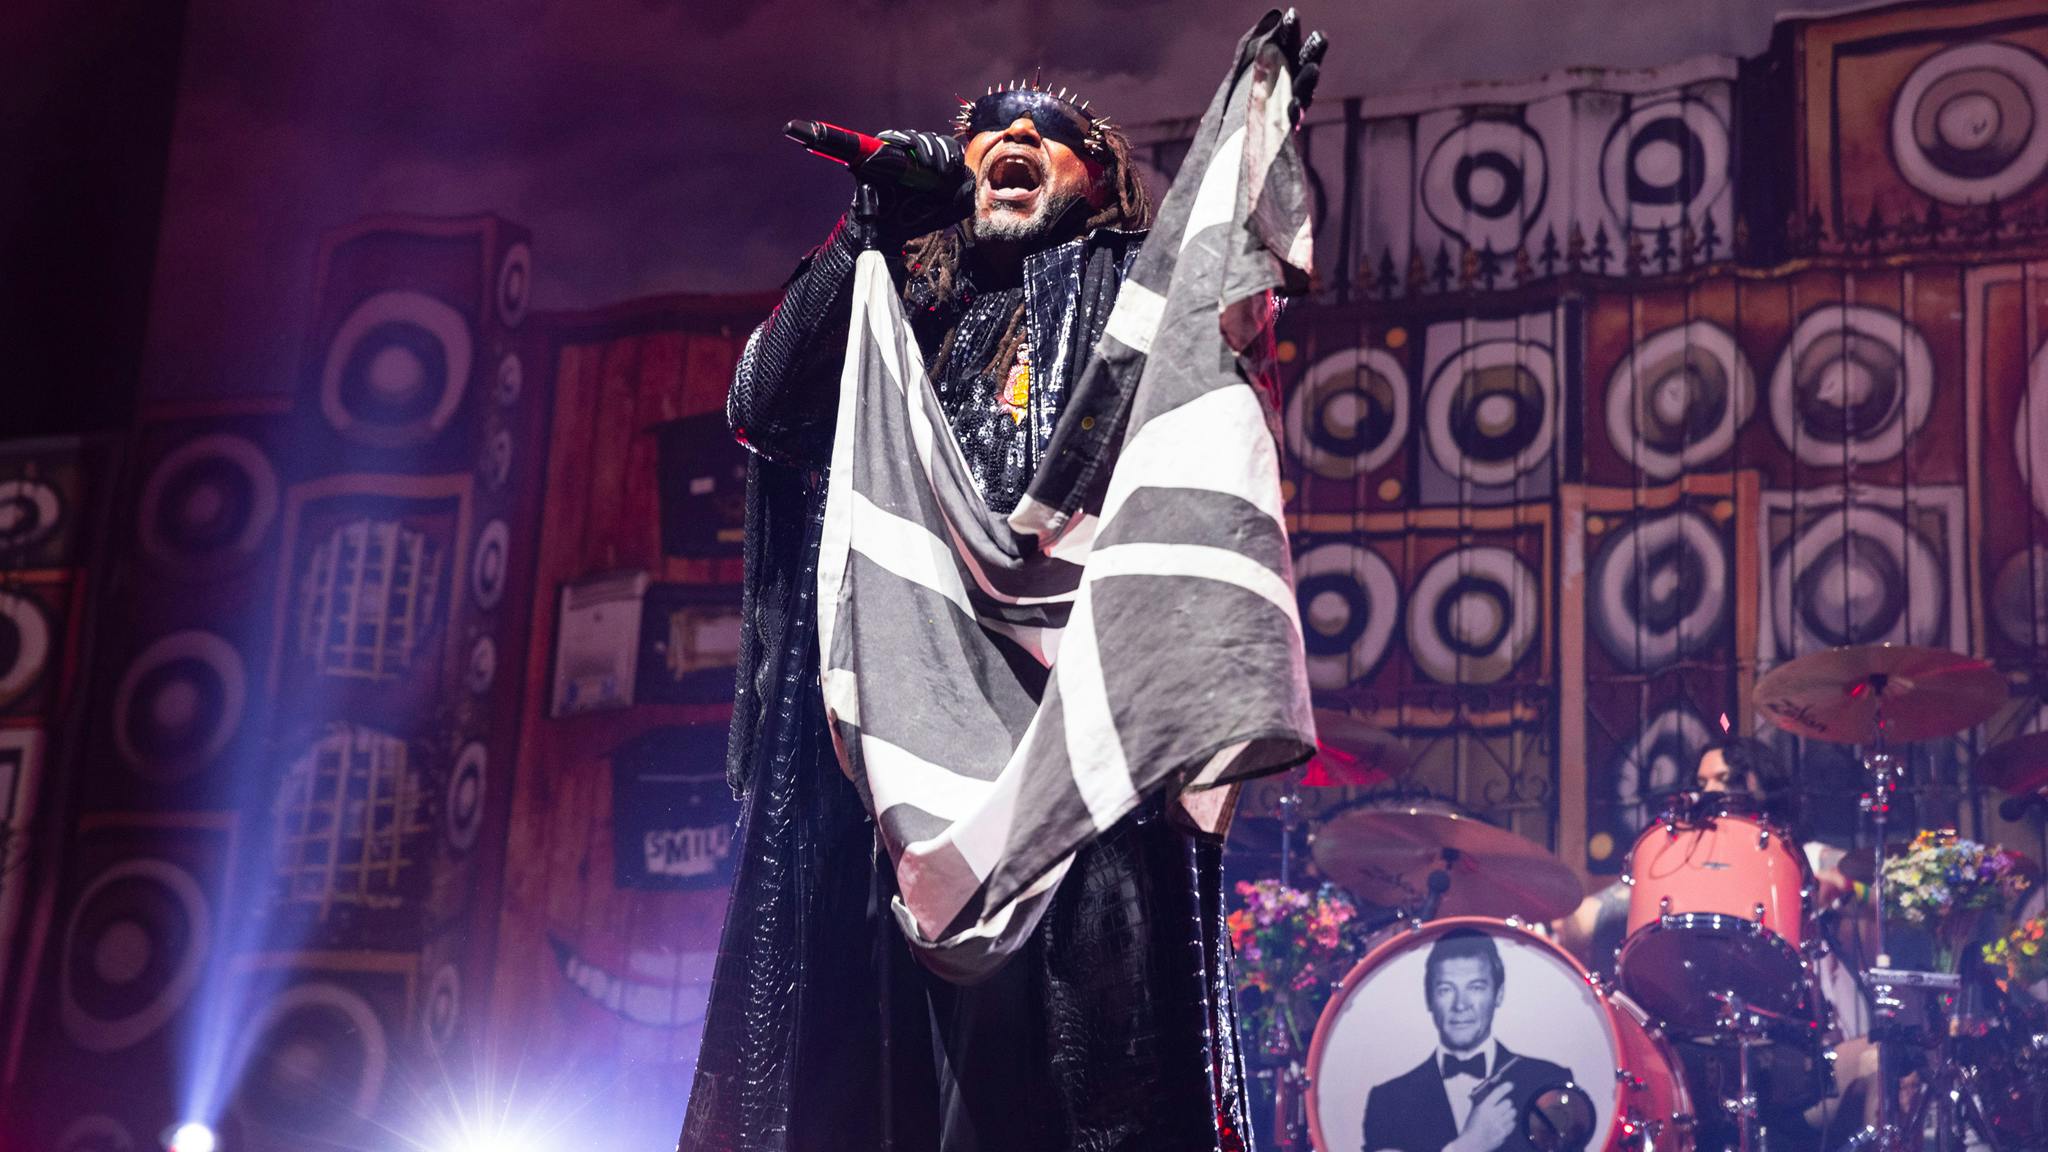 Live review: Skindred at OVO Arena Wembley, London